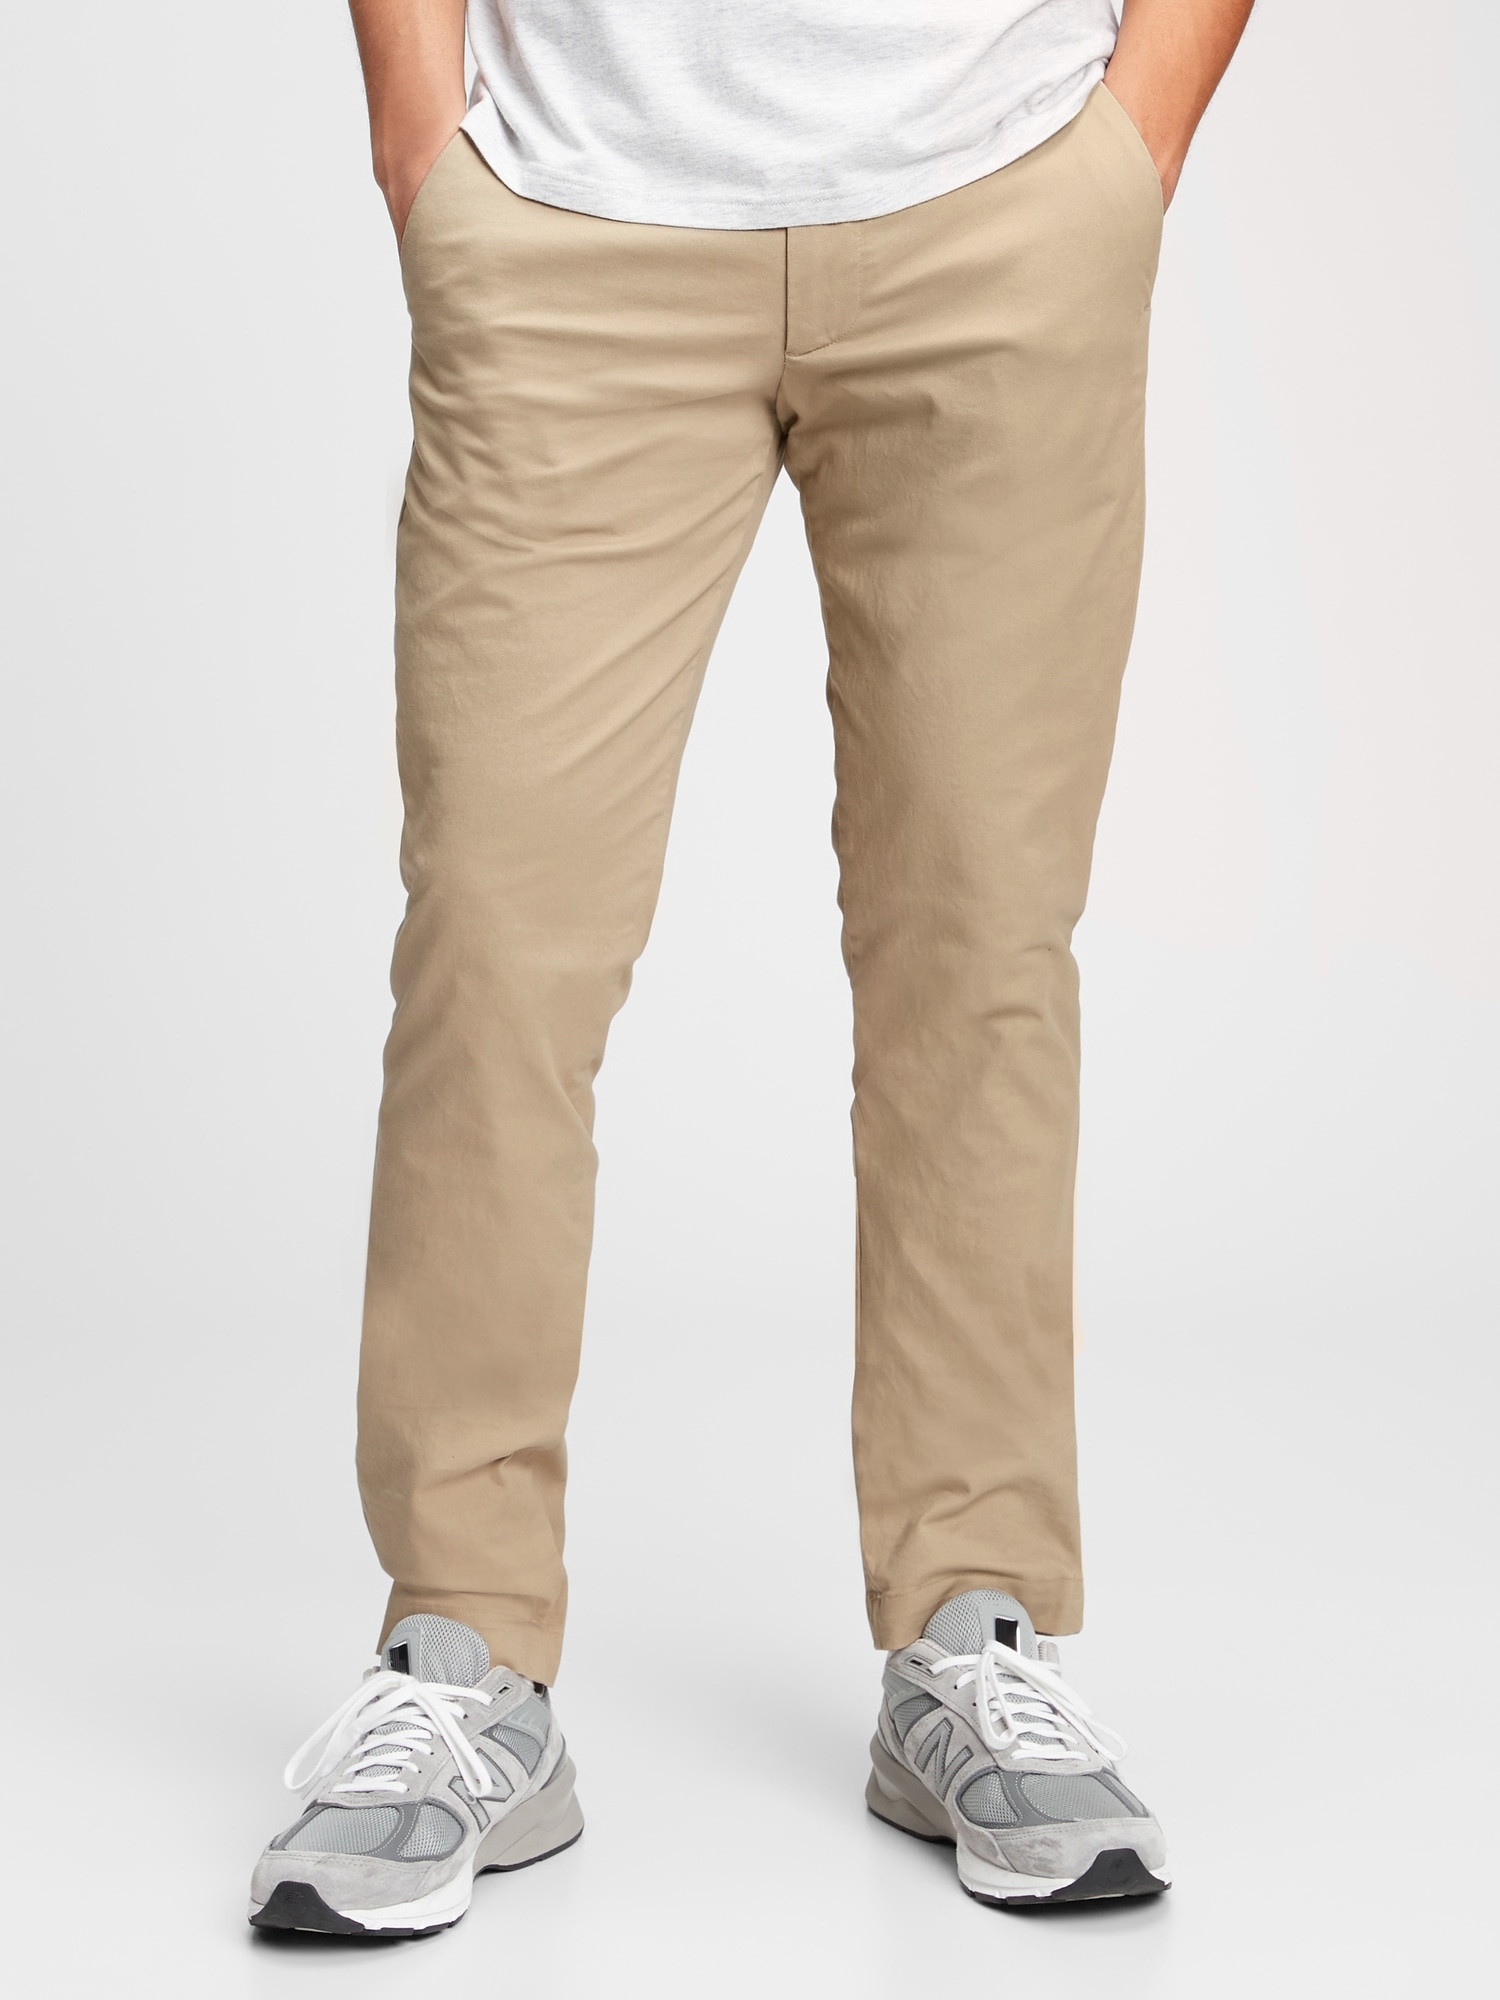 Mens Chinos  Slim Fit Tailored Fit Stretch  Moss